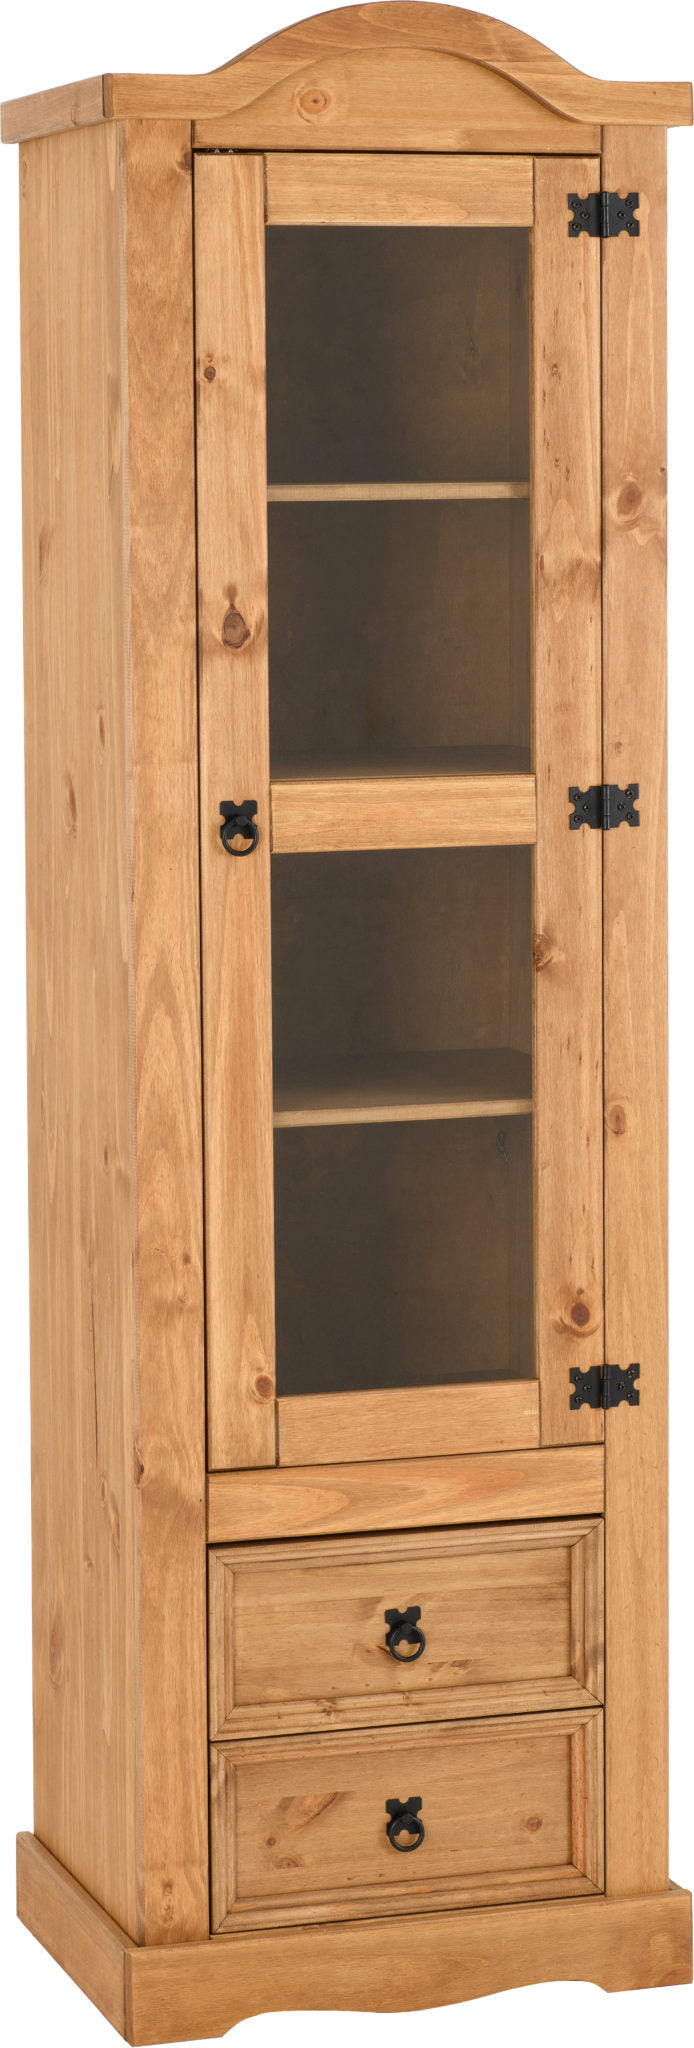 Corona 1 Door 2 Drawer Glass Display Unit - The Right Buy Store